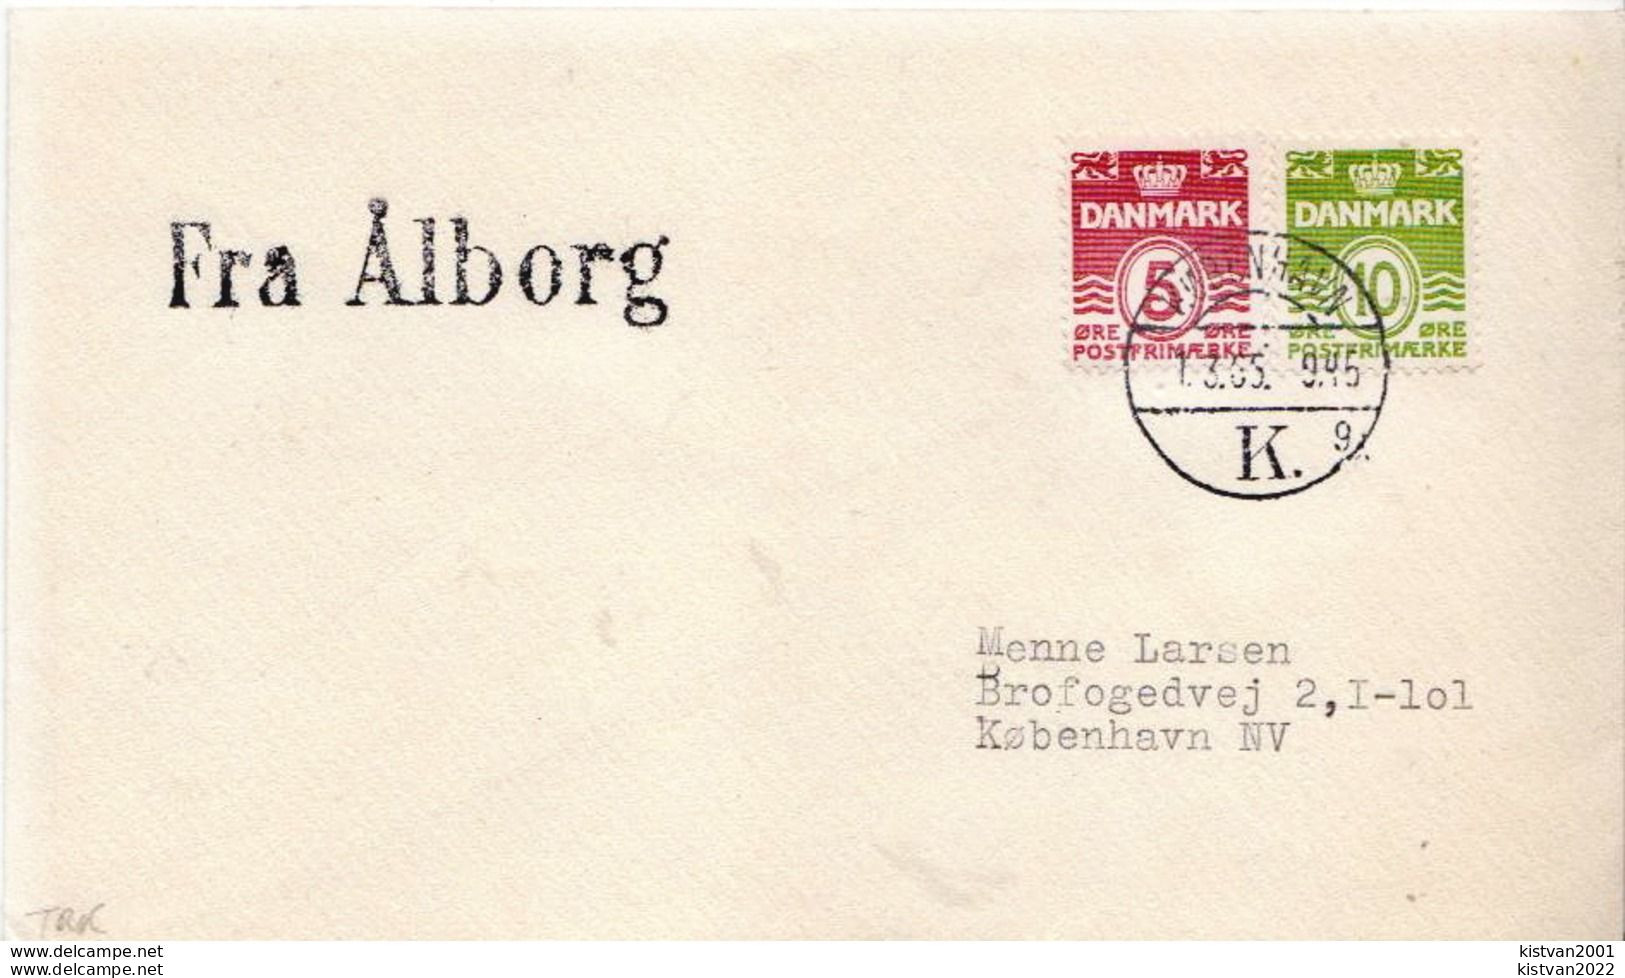 Postal History Cover: Denmark Cover With FRA ALBORG Ship Cancel - Covers & Documents